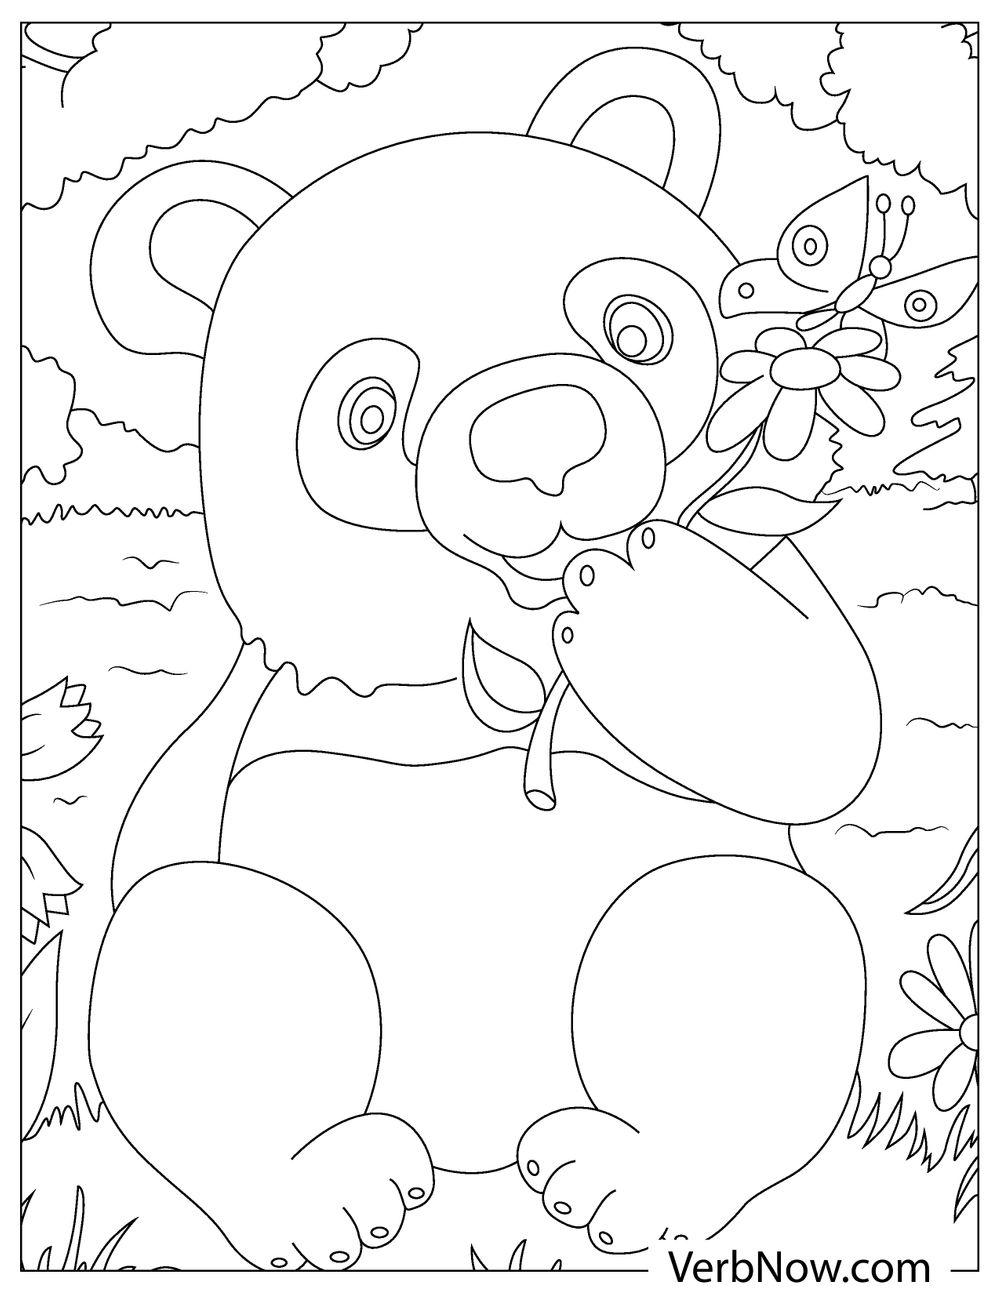 Free PANDA BEARS Coloring Pages & Book for Download (Printable PDF) -  VerbNow